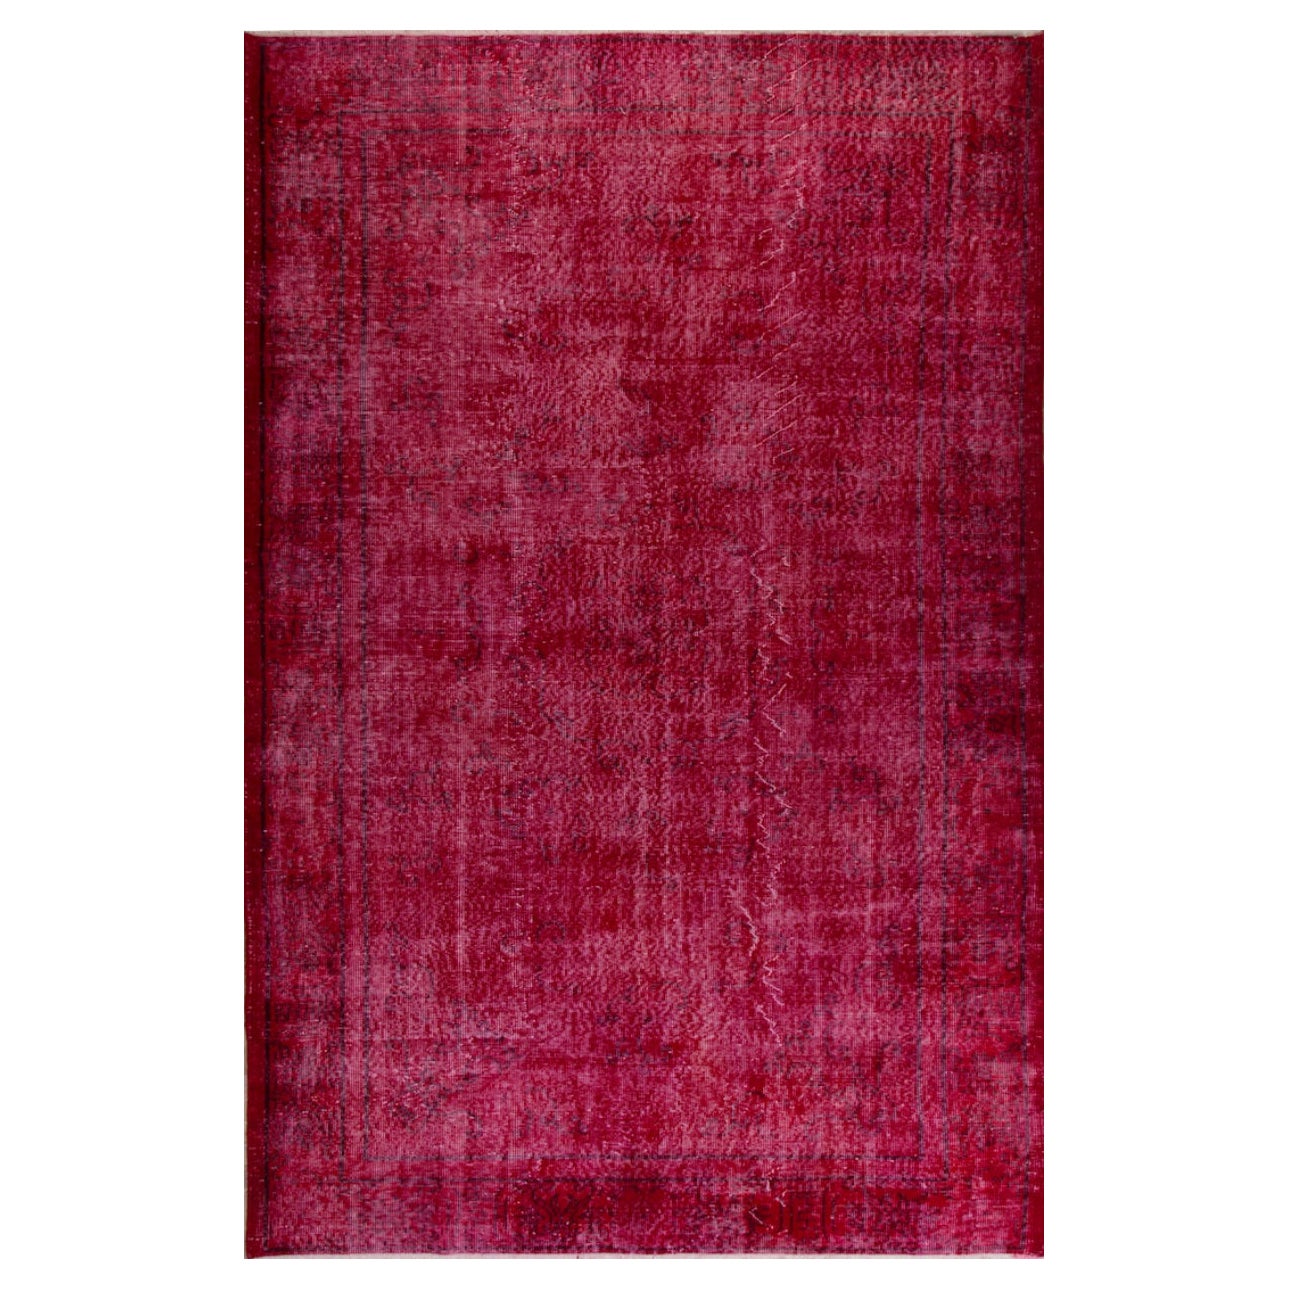 Handmade Turkish Rug in Burgundy Red, Ideal for Contemporary Interiors